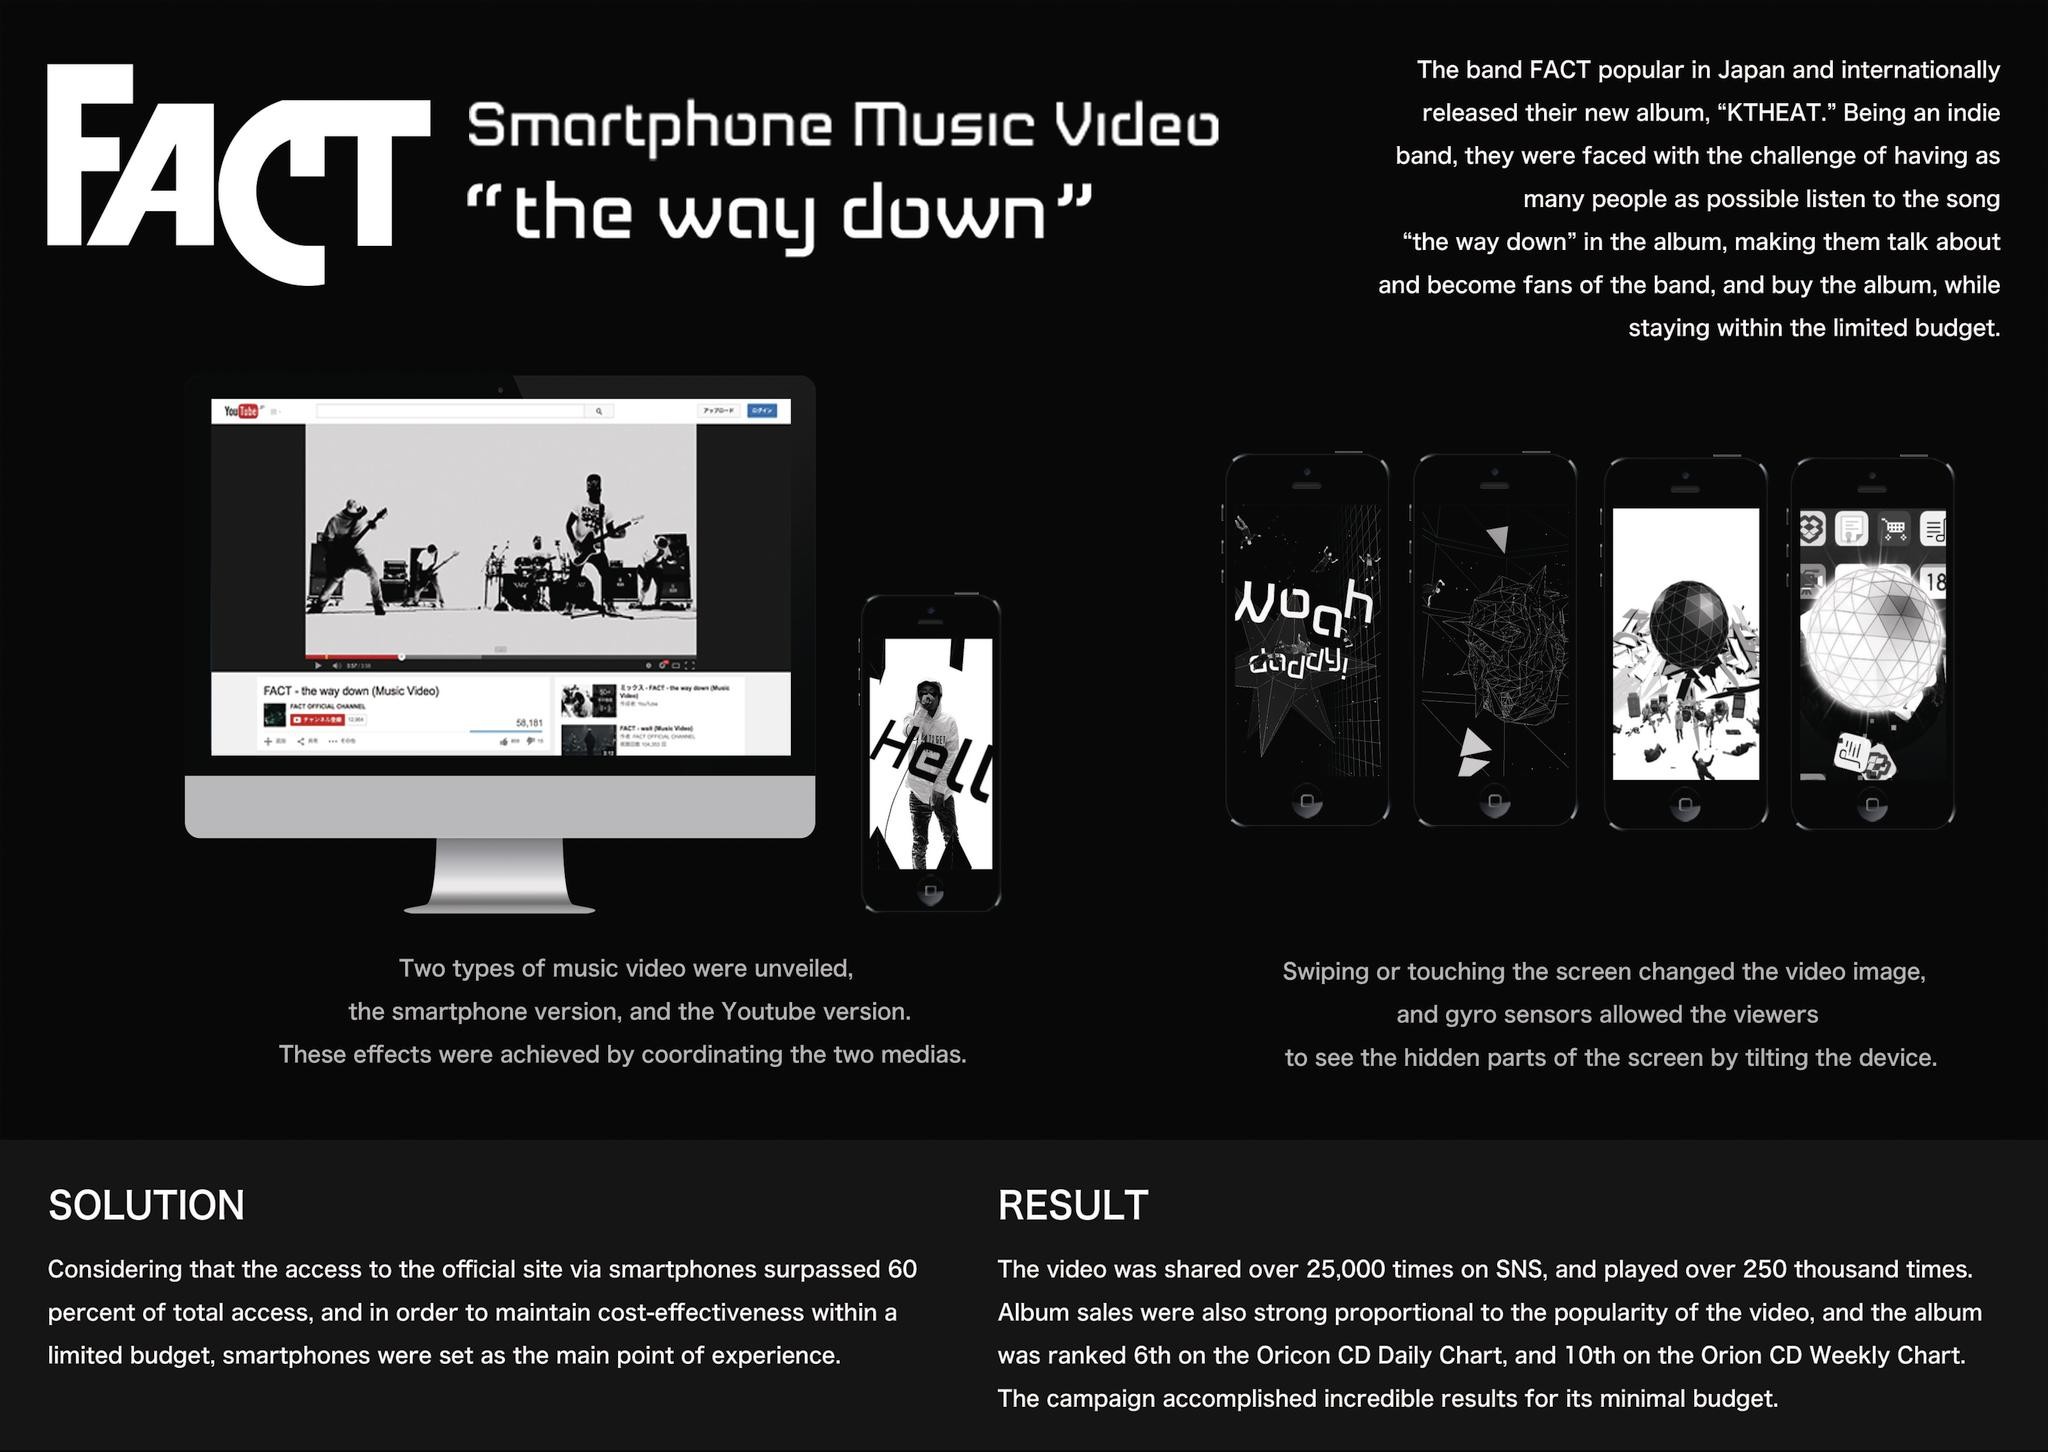 the way down / FACT : smartphone music video